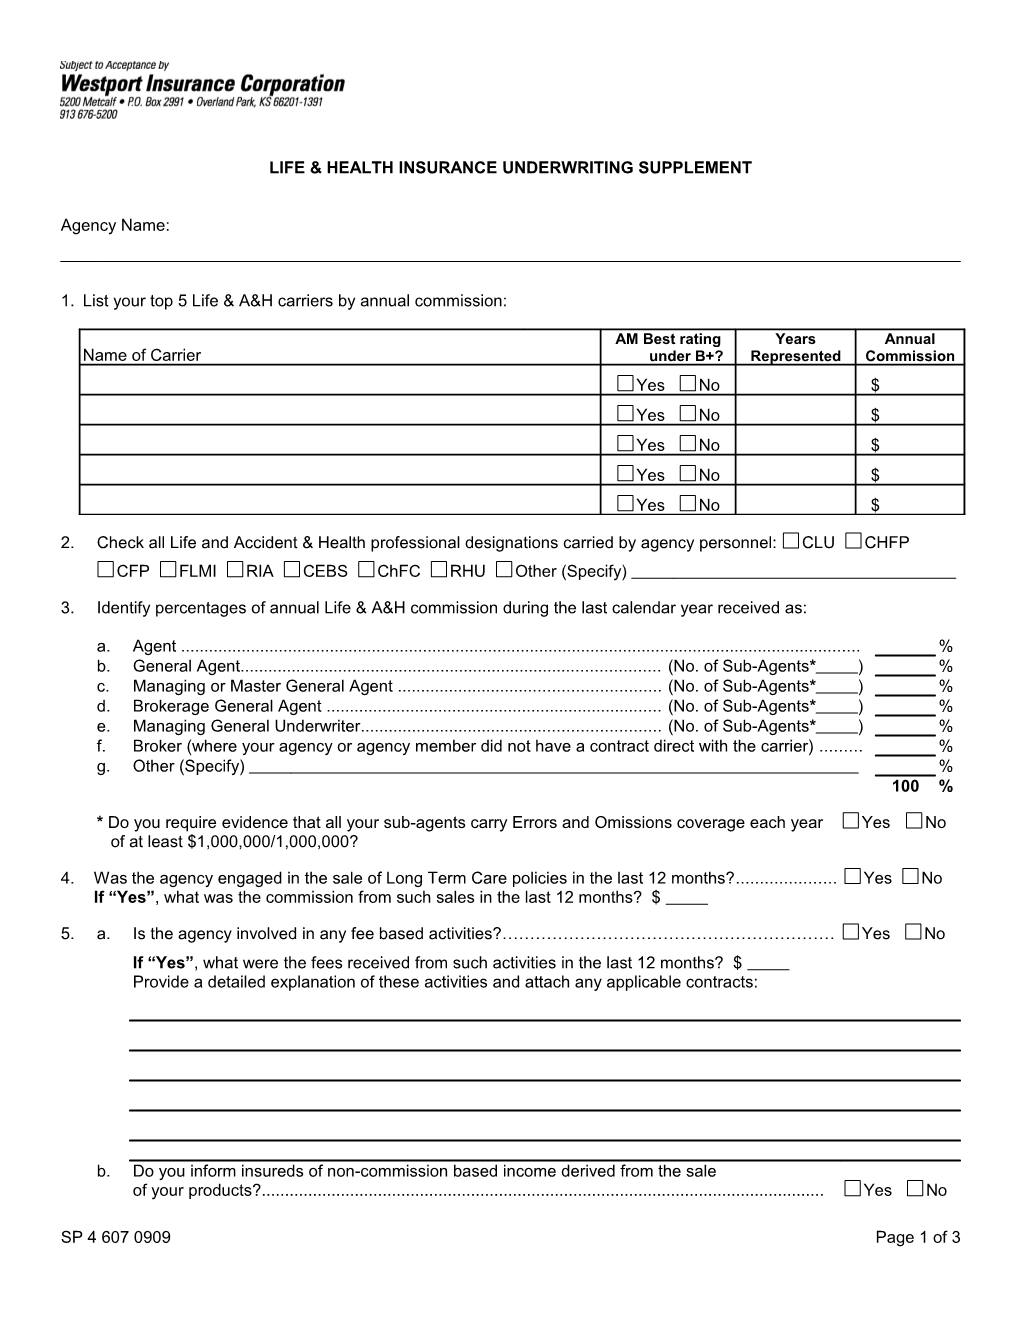 Life Insurance Agency Underwriting Questionnaire